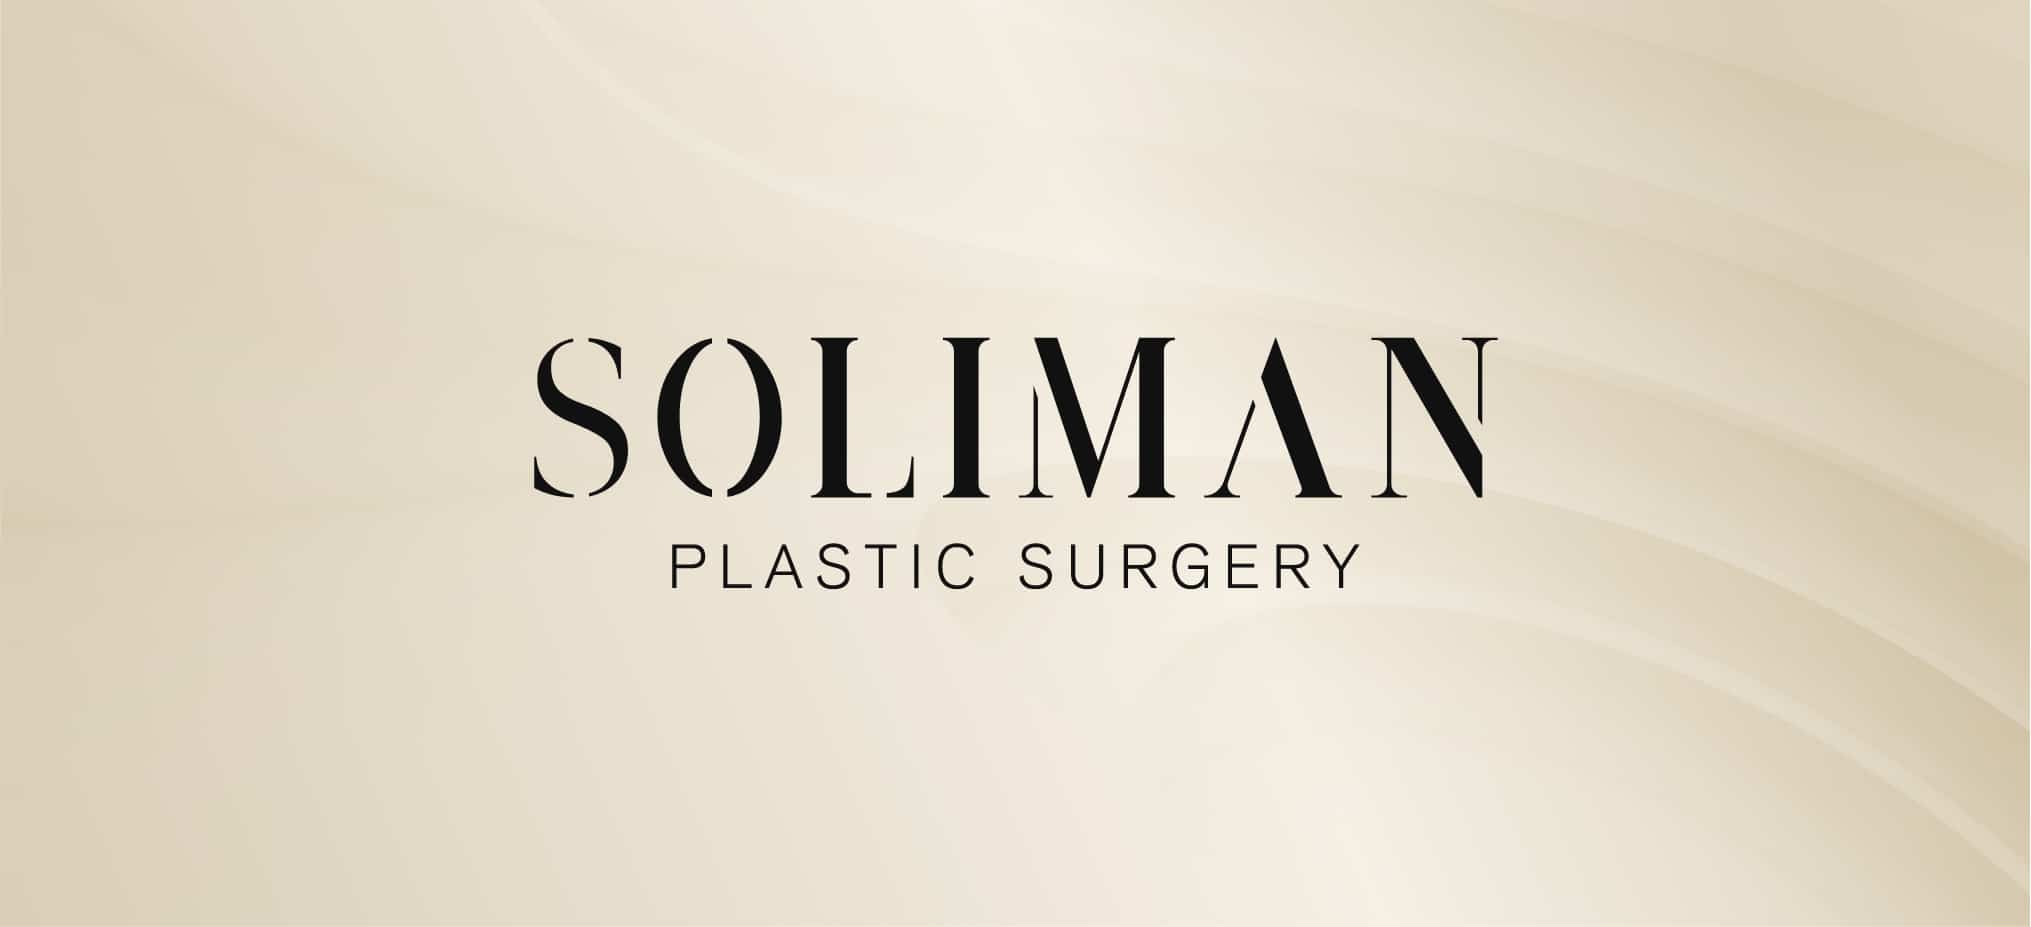 How Effective Are Silicone Strips for Plastic Surgery Scars - 1